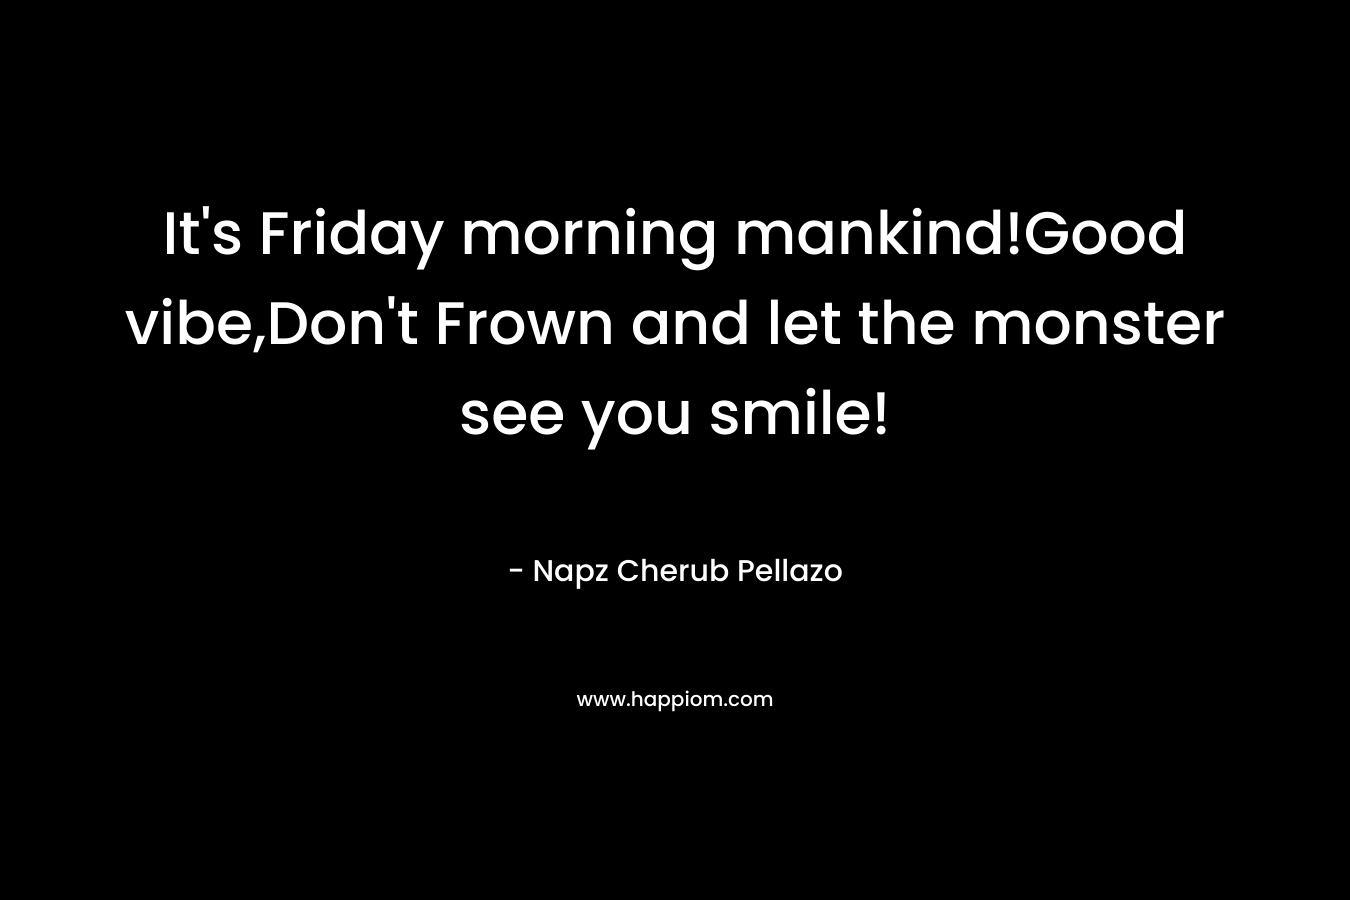 It’s Friday morning mankind!Good vibe,Don’t Frown and let the monster see you smile! – Napz Cherub Pellazo